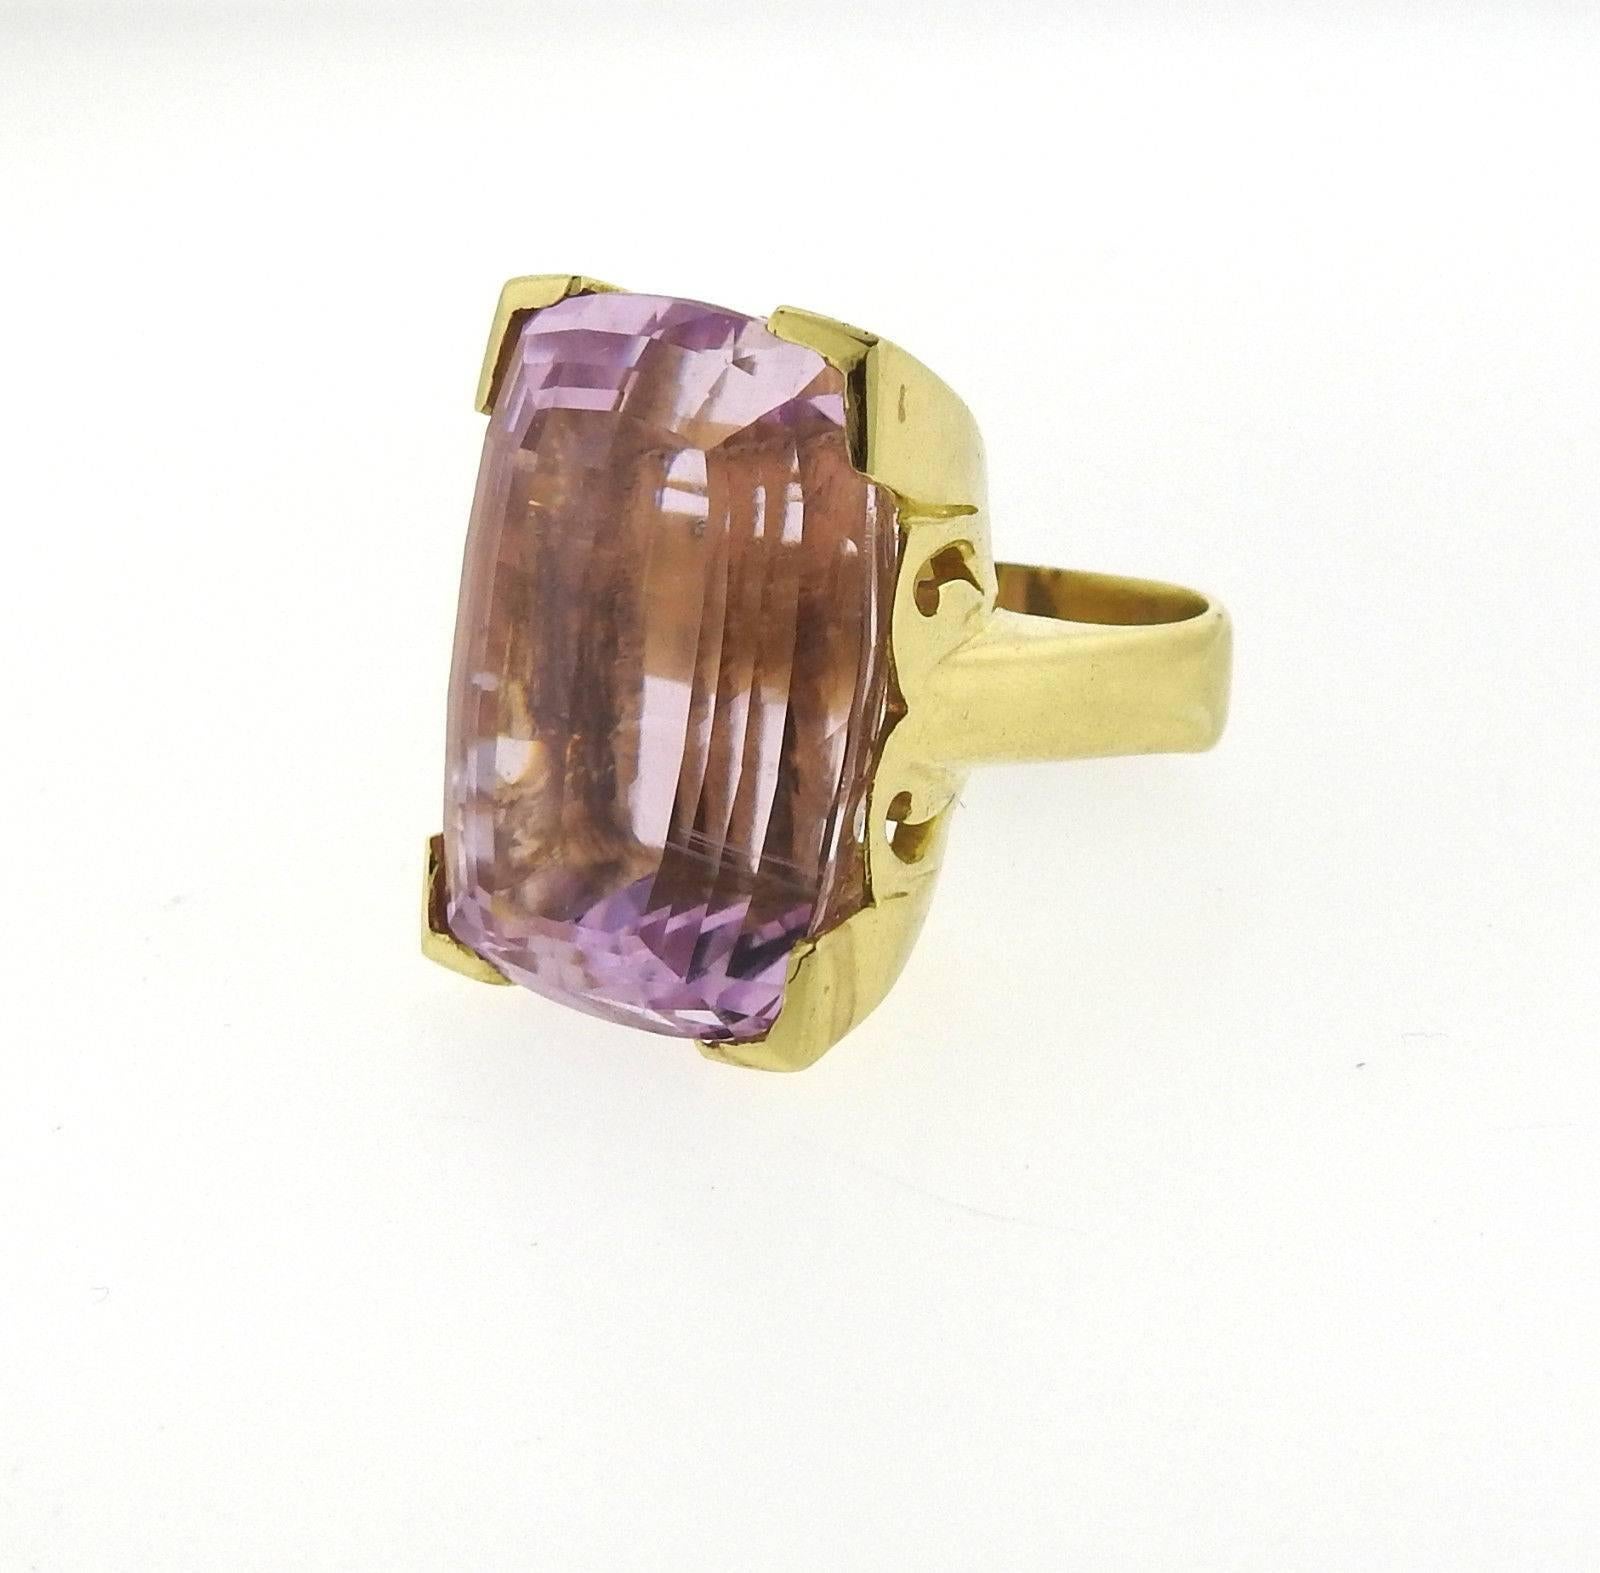 An 18k yellow gold ring set with a GIA certified 60.5 carat Kunzite (28.85mm x 20.78mm x 16.55mm).  The ring is a size 8 1/2 and weighs 42.3 grams. Comes with GIA cert for Kunzite.